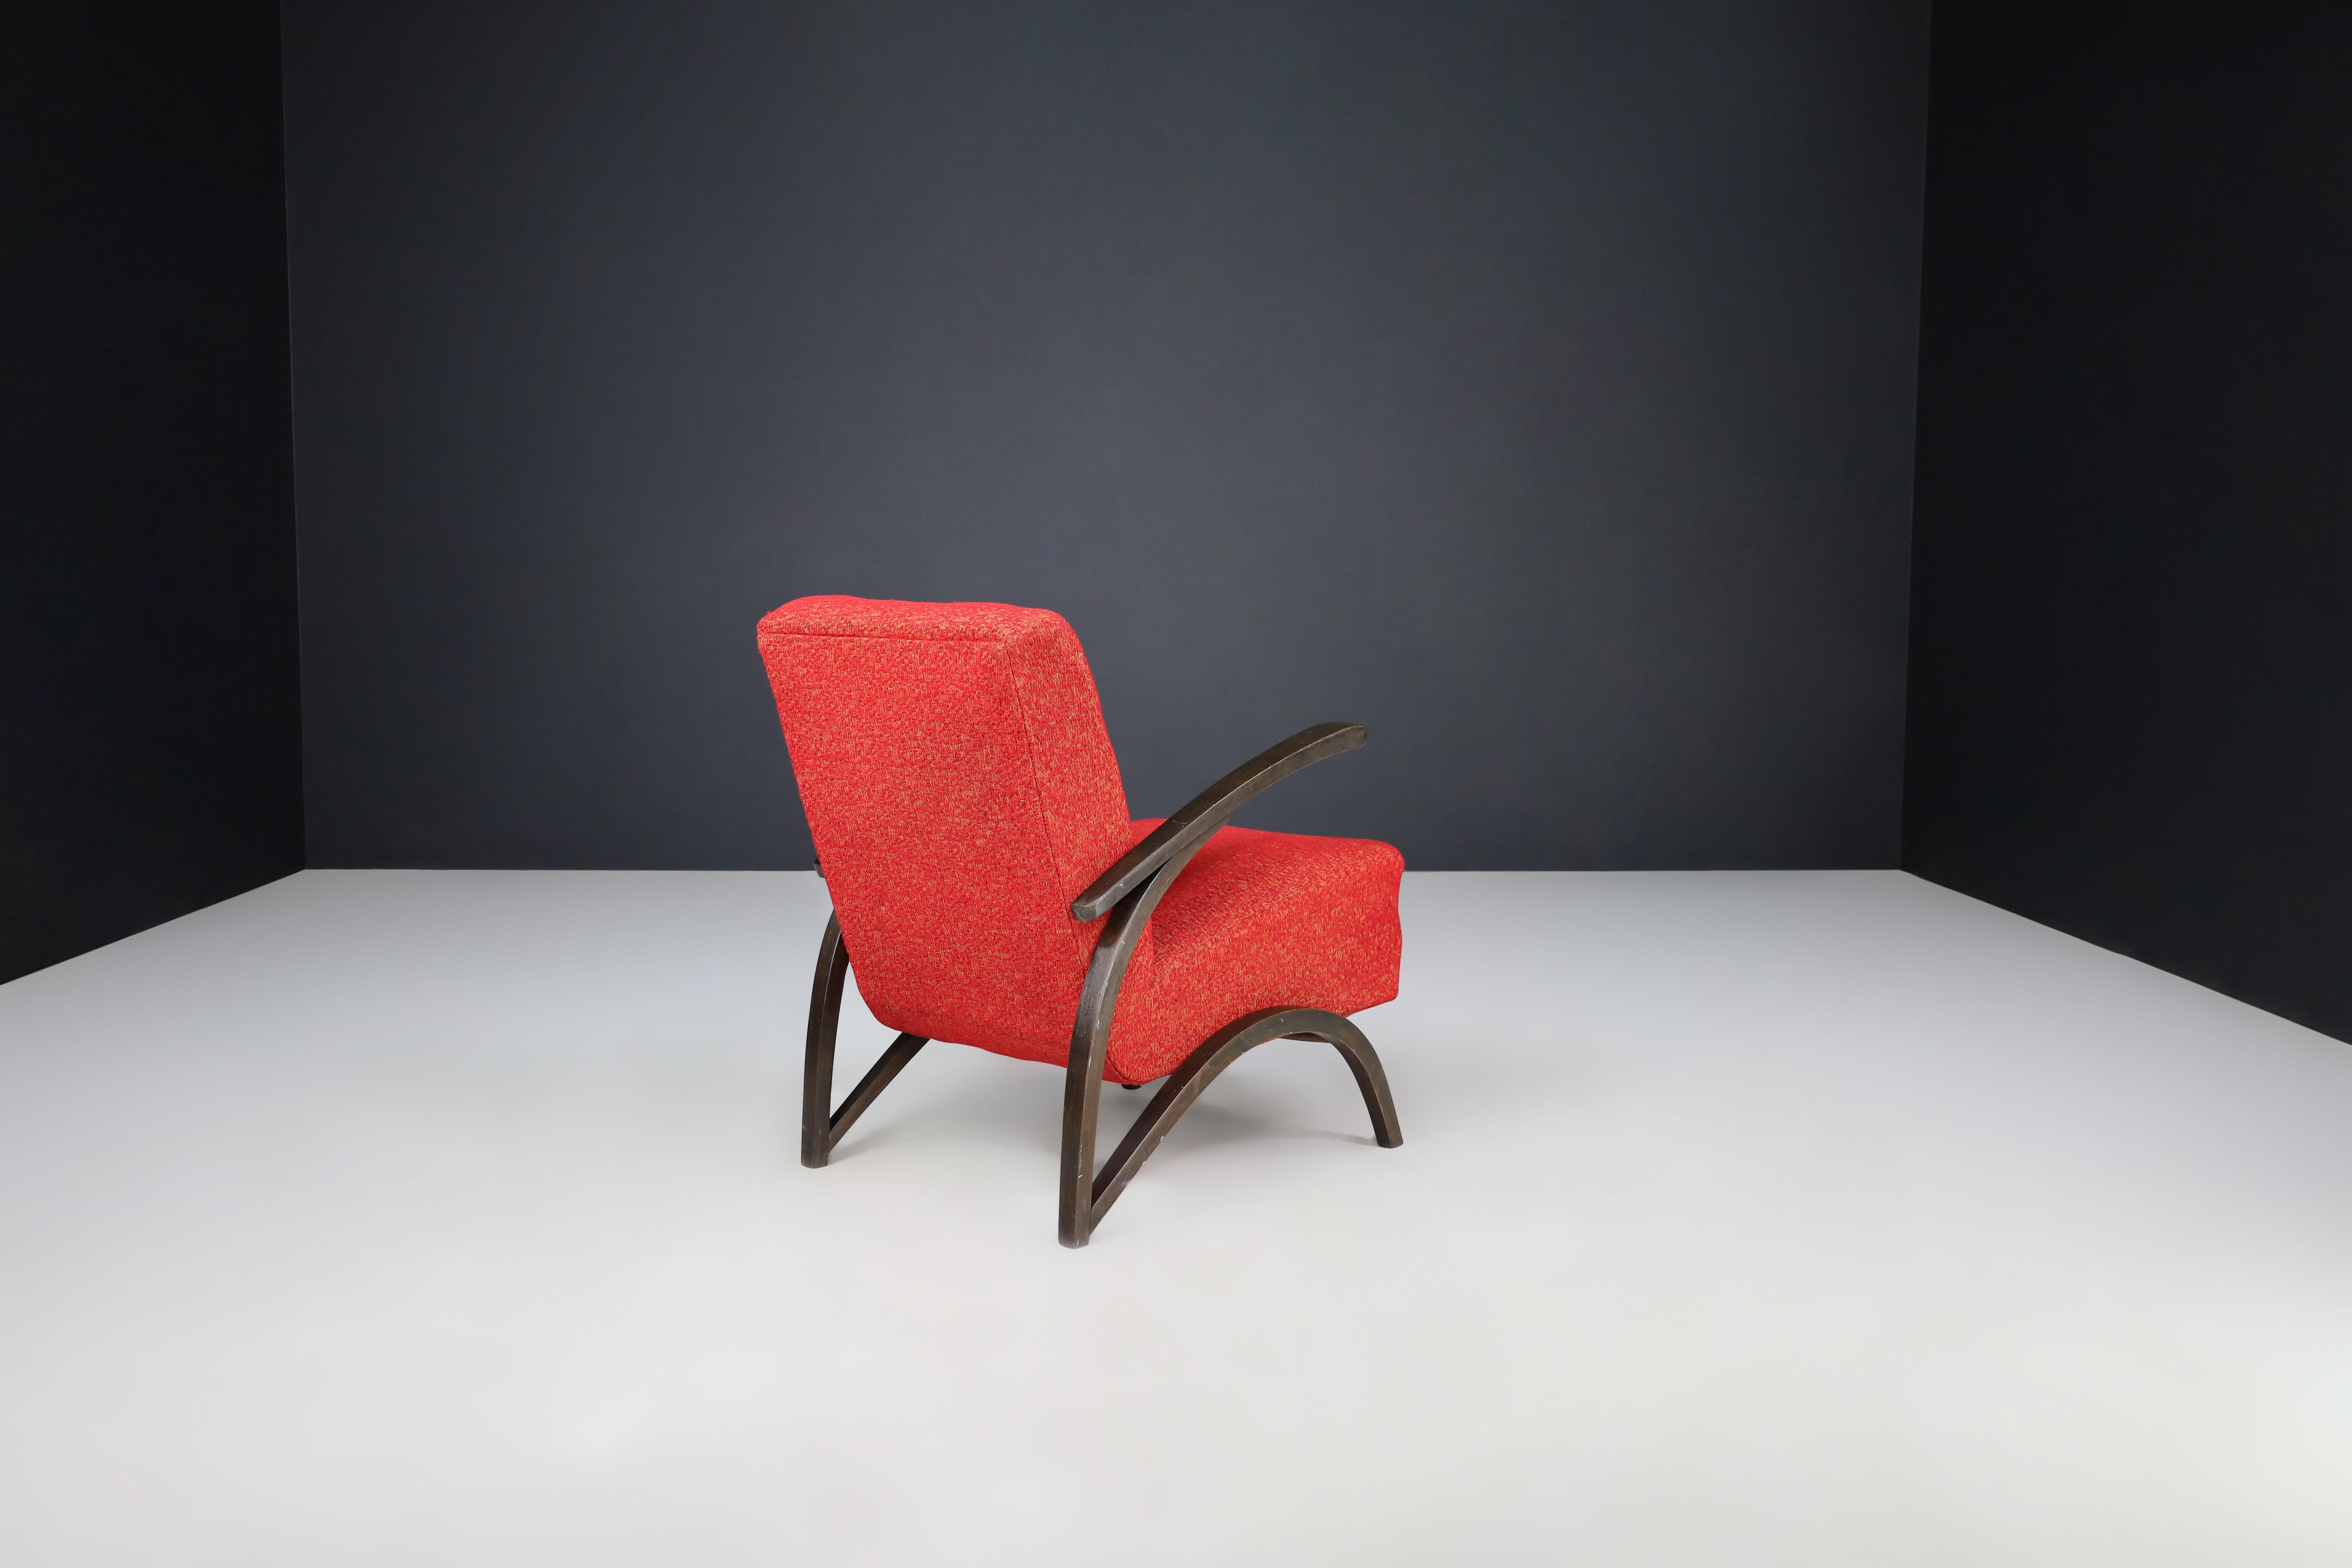 Fabric Jindrich Halabala Lounge Chair in Original Red Upholstery Czech Republic 1930 For Sale